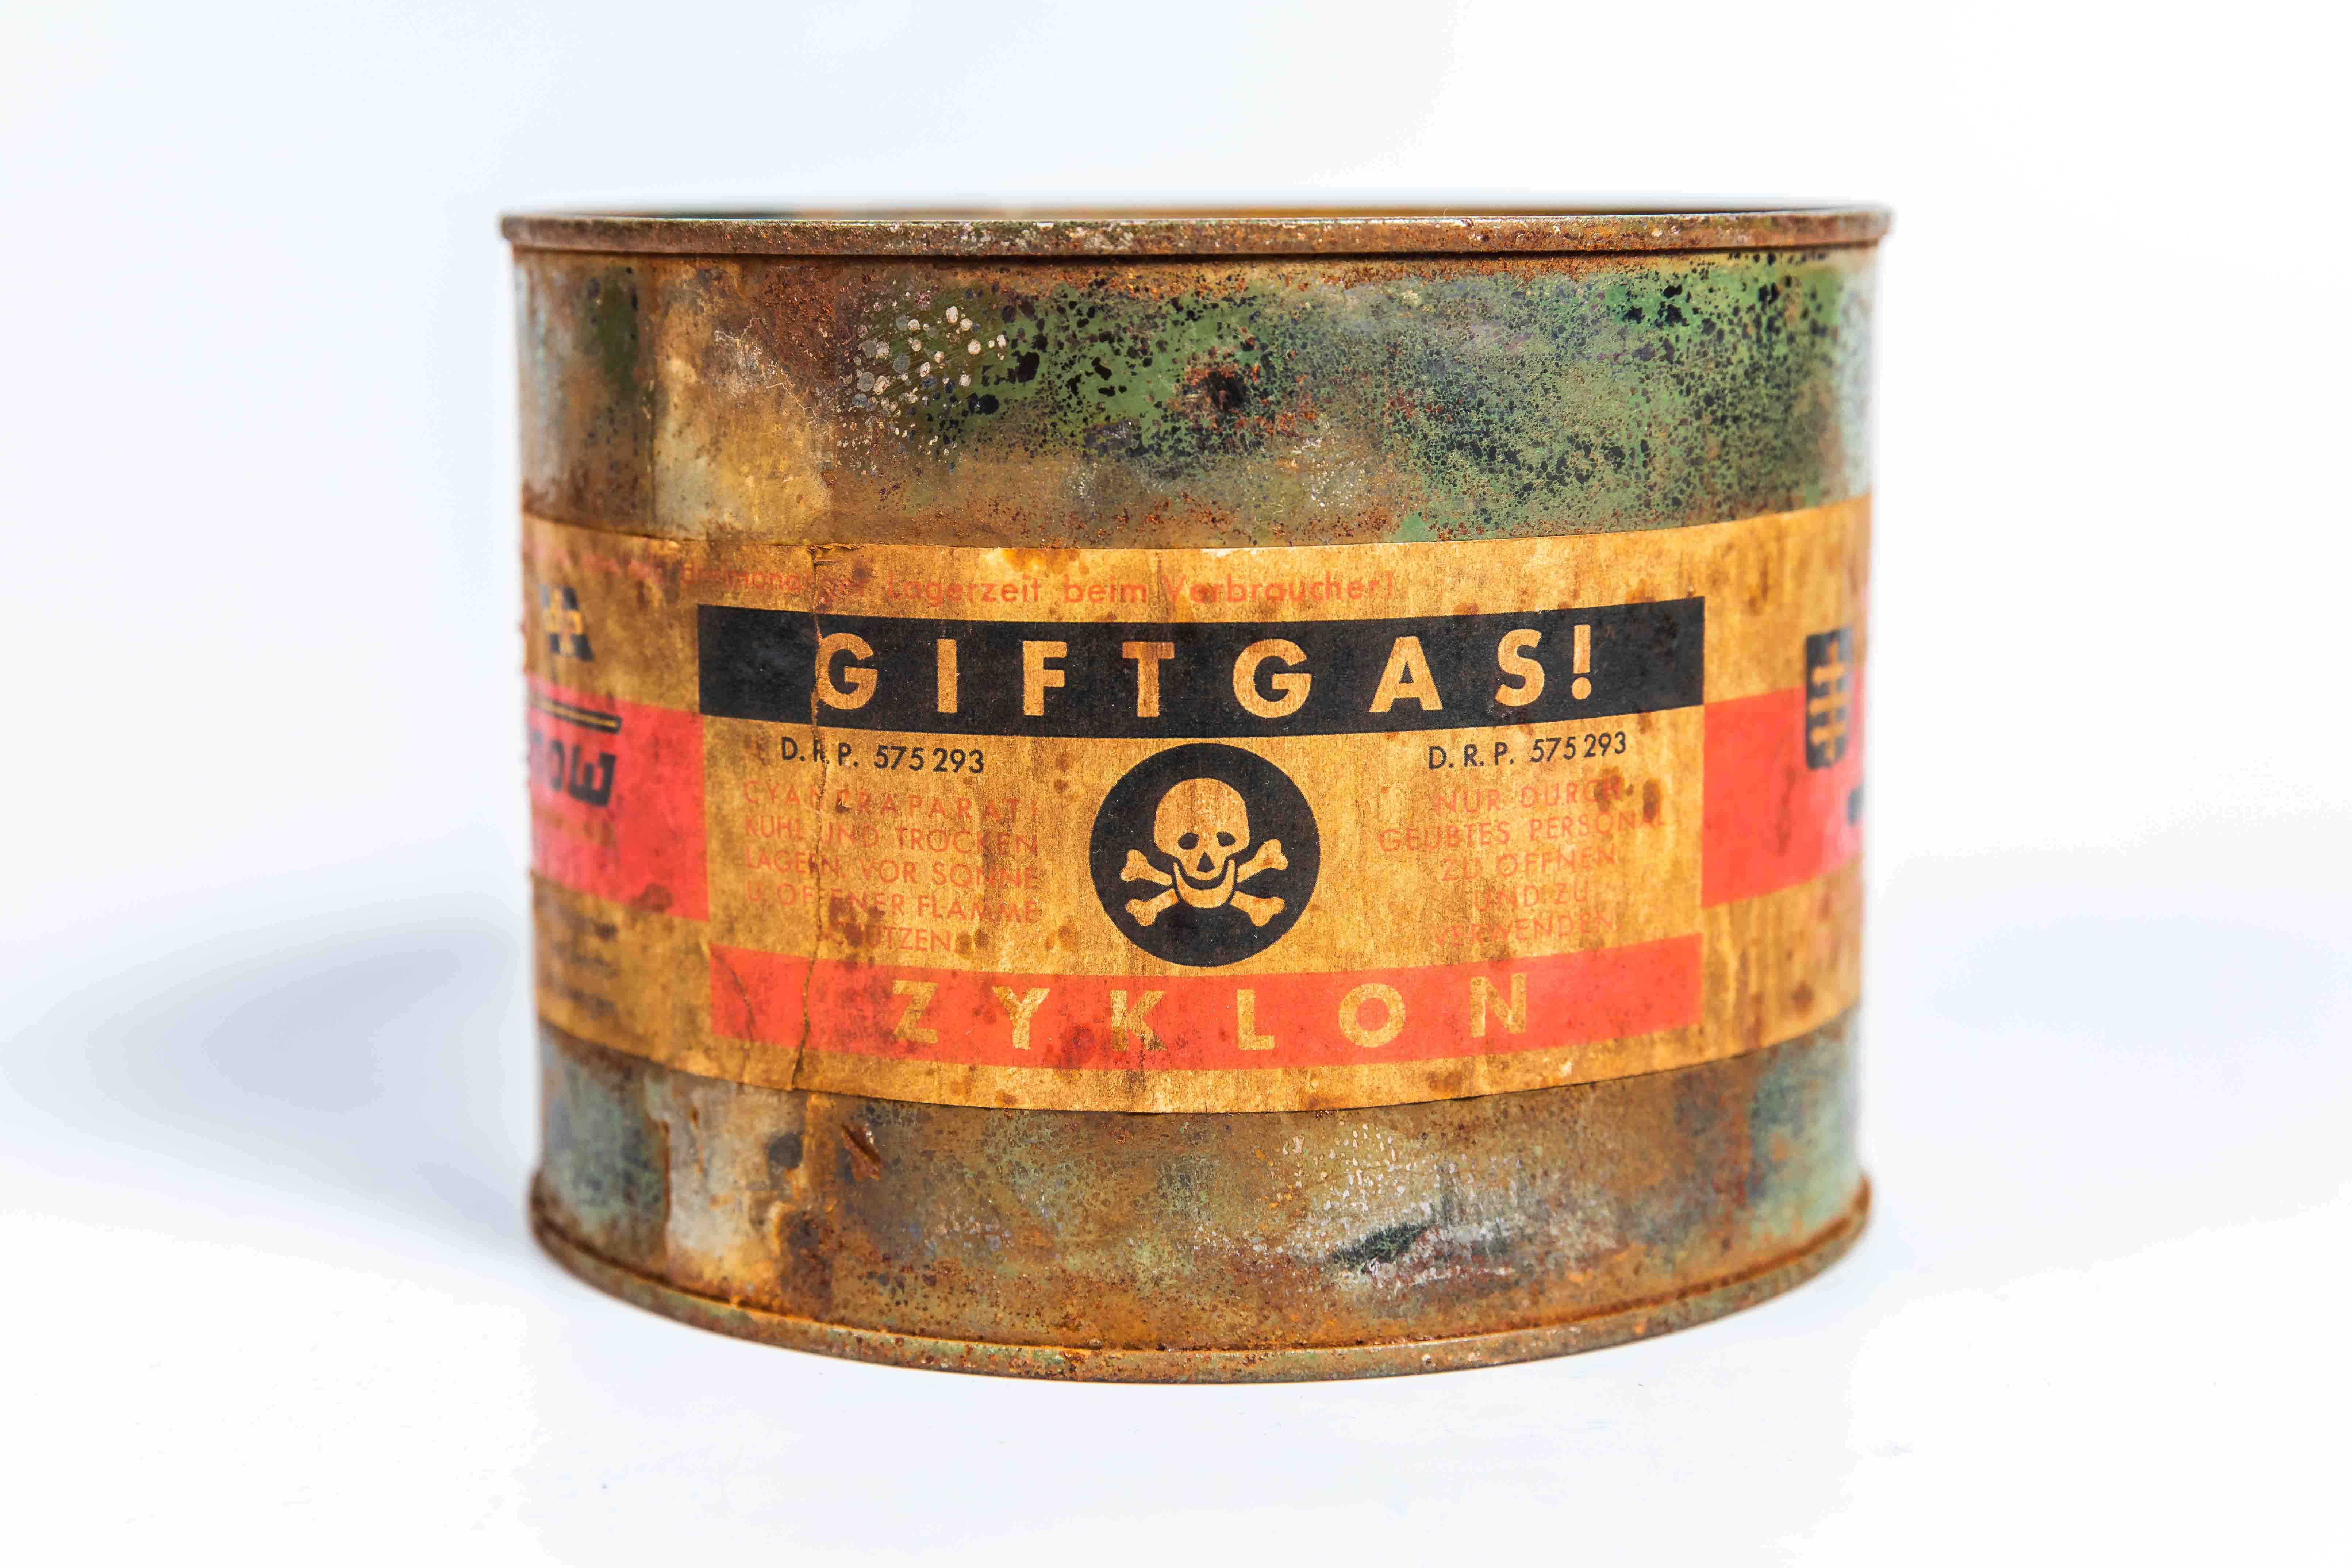 THIS DAY - September 3, 1941 Zyklon B used as a weapon of mass destruction ...